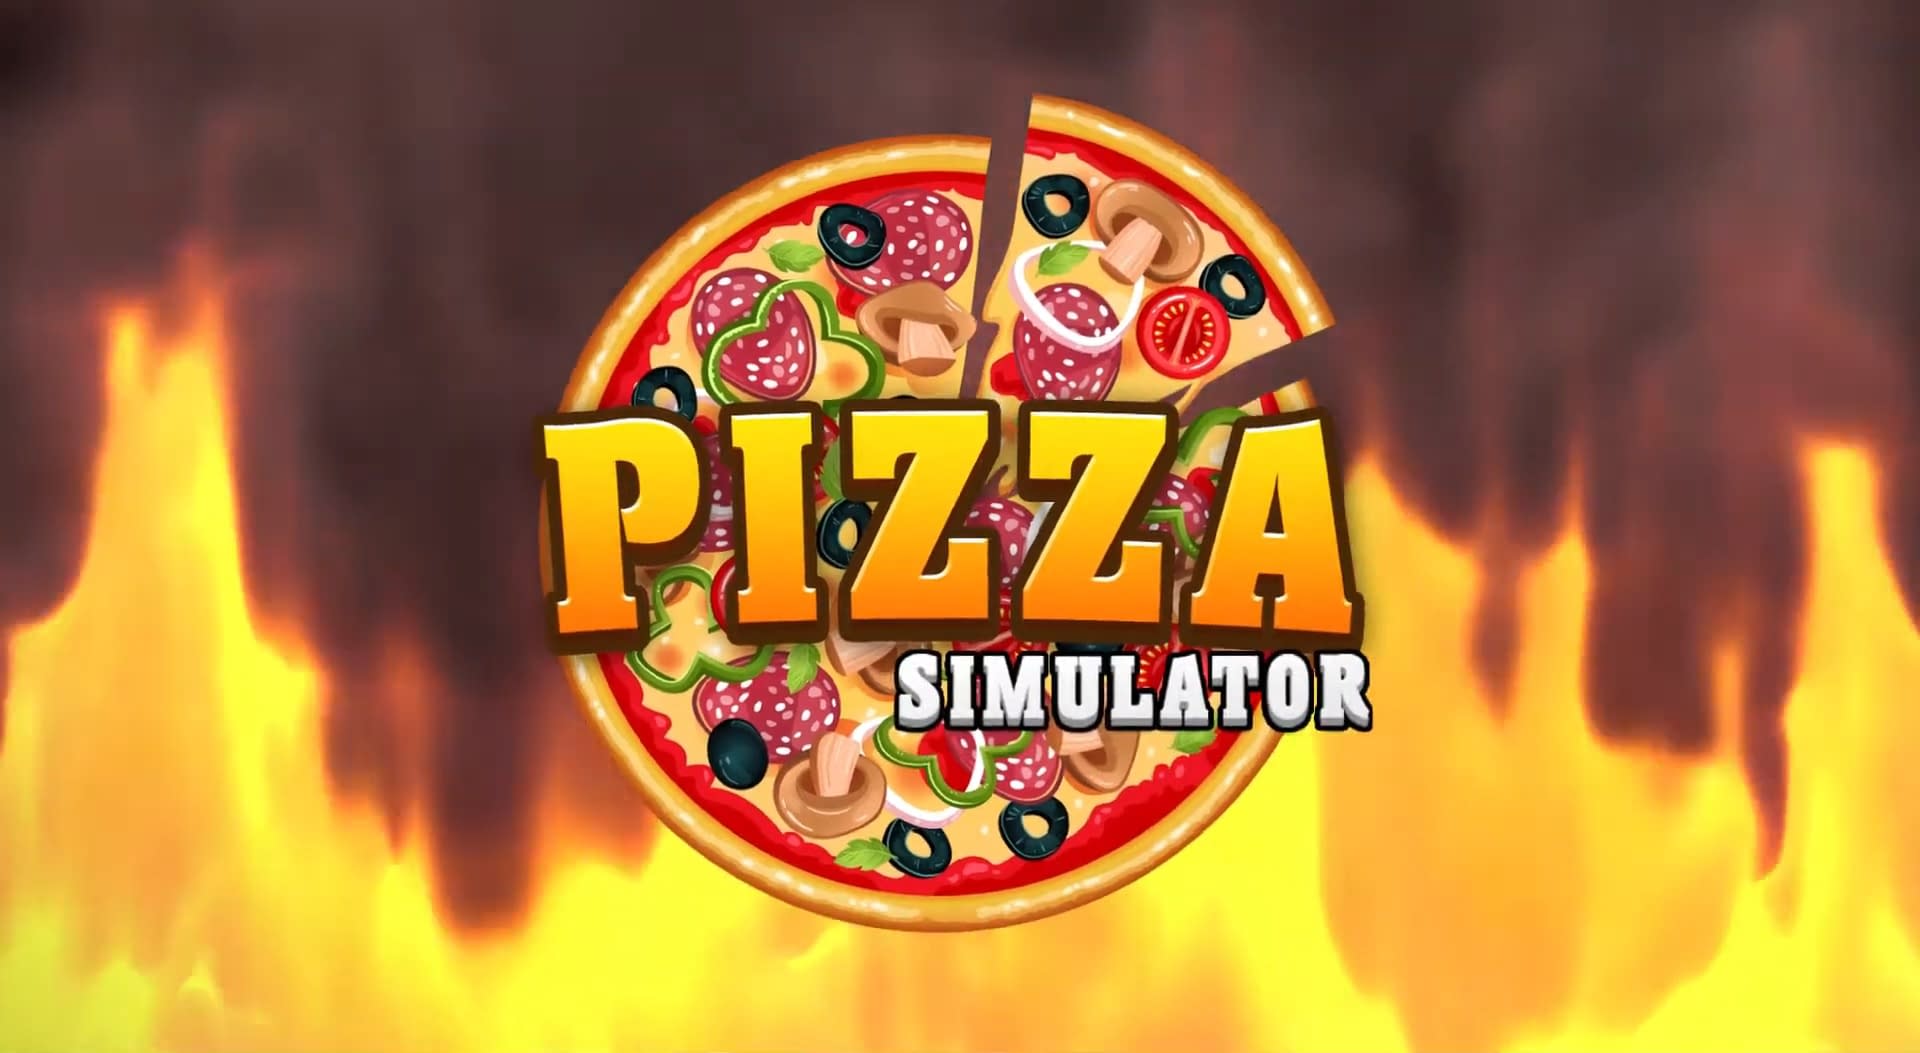 Why Pizza? for Nintendo Switch - Nintendo Official Site